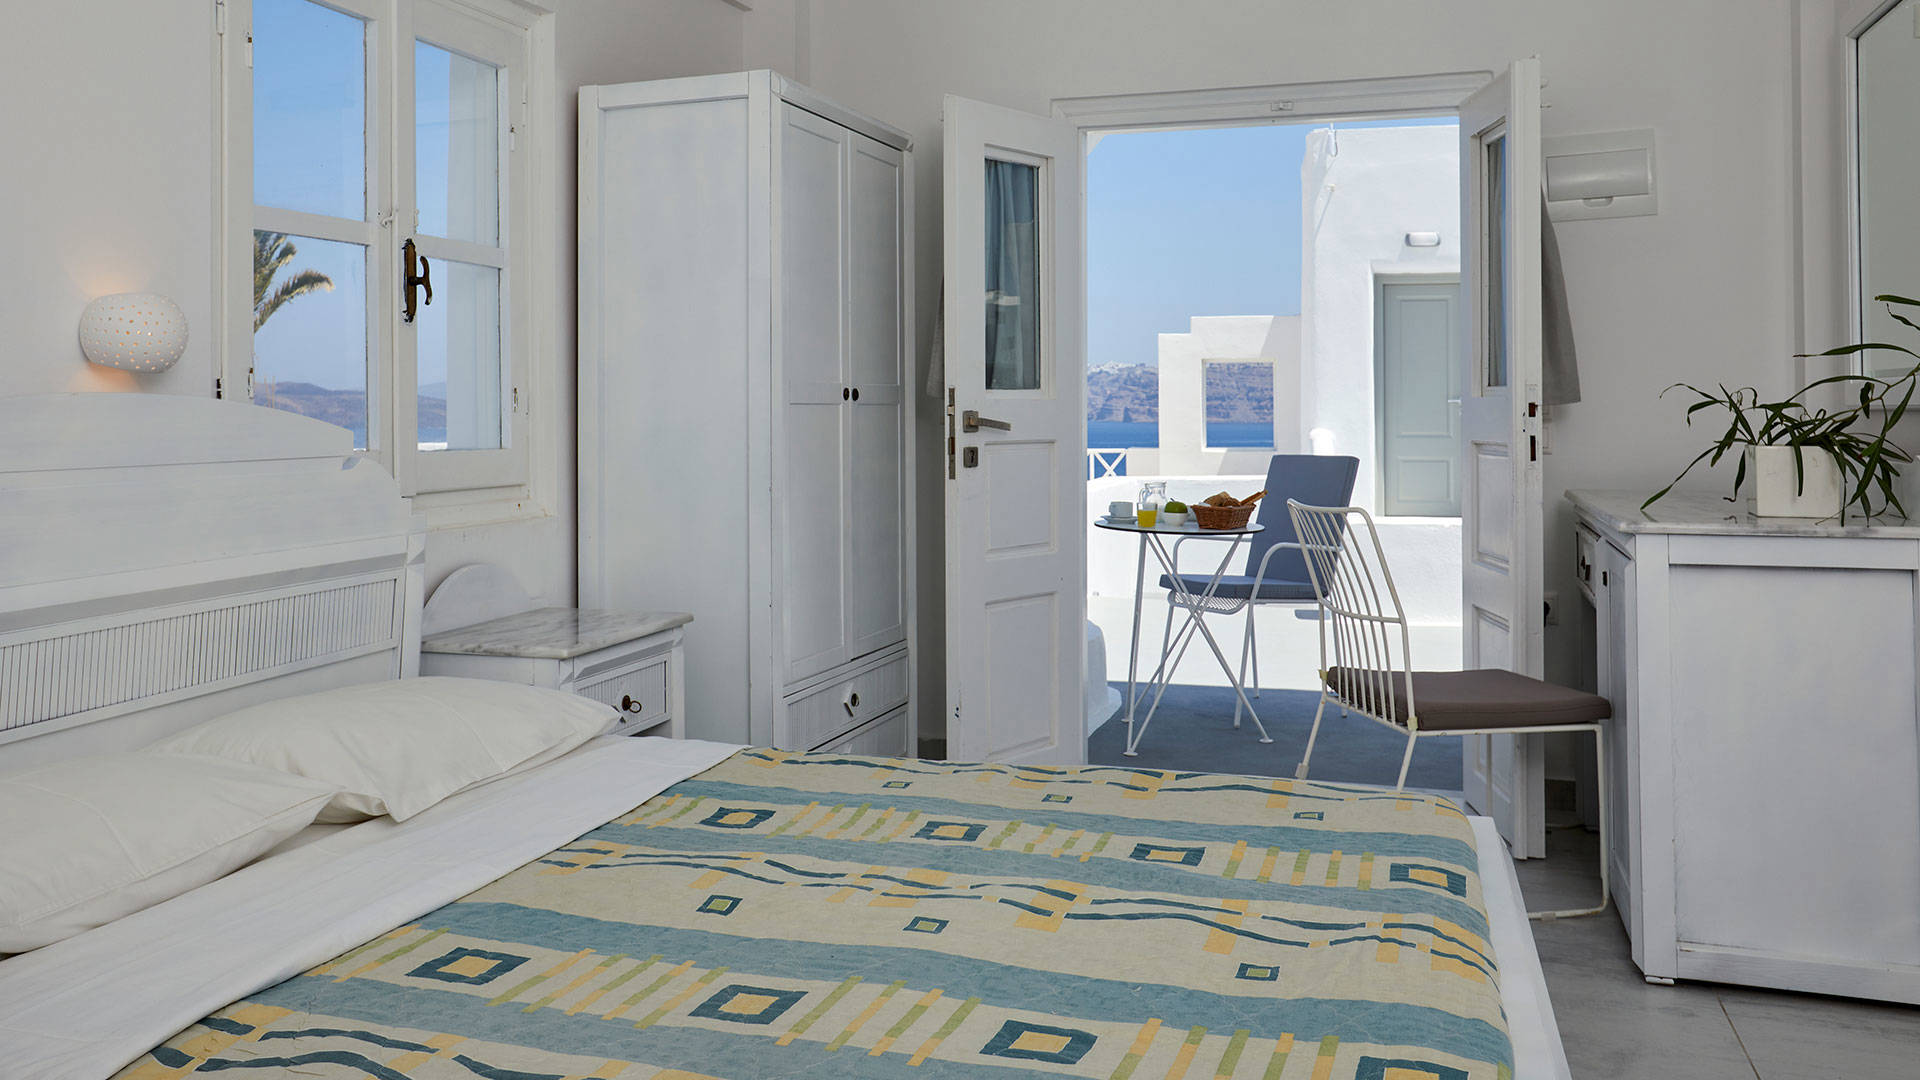 
Santorini View Hotel room with double bed, desk and mirror, and terrace with table seats for breakfast